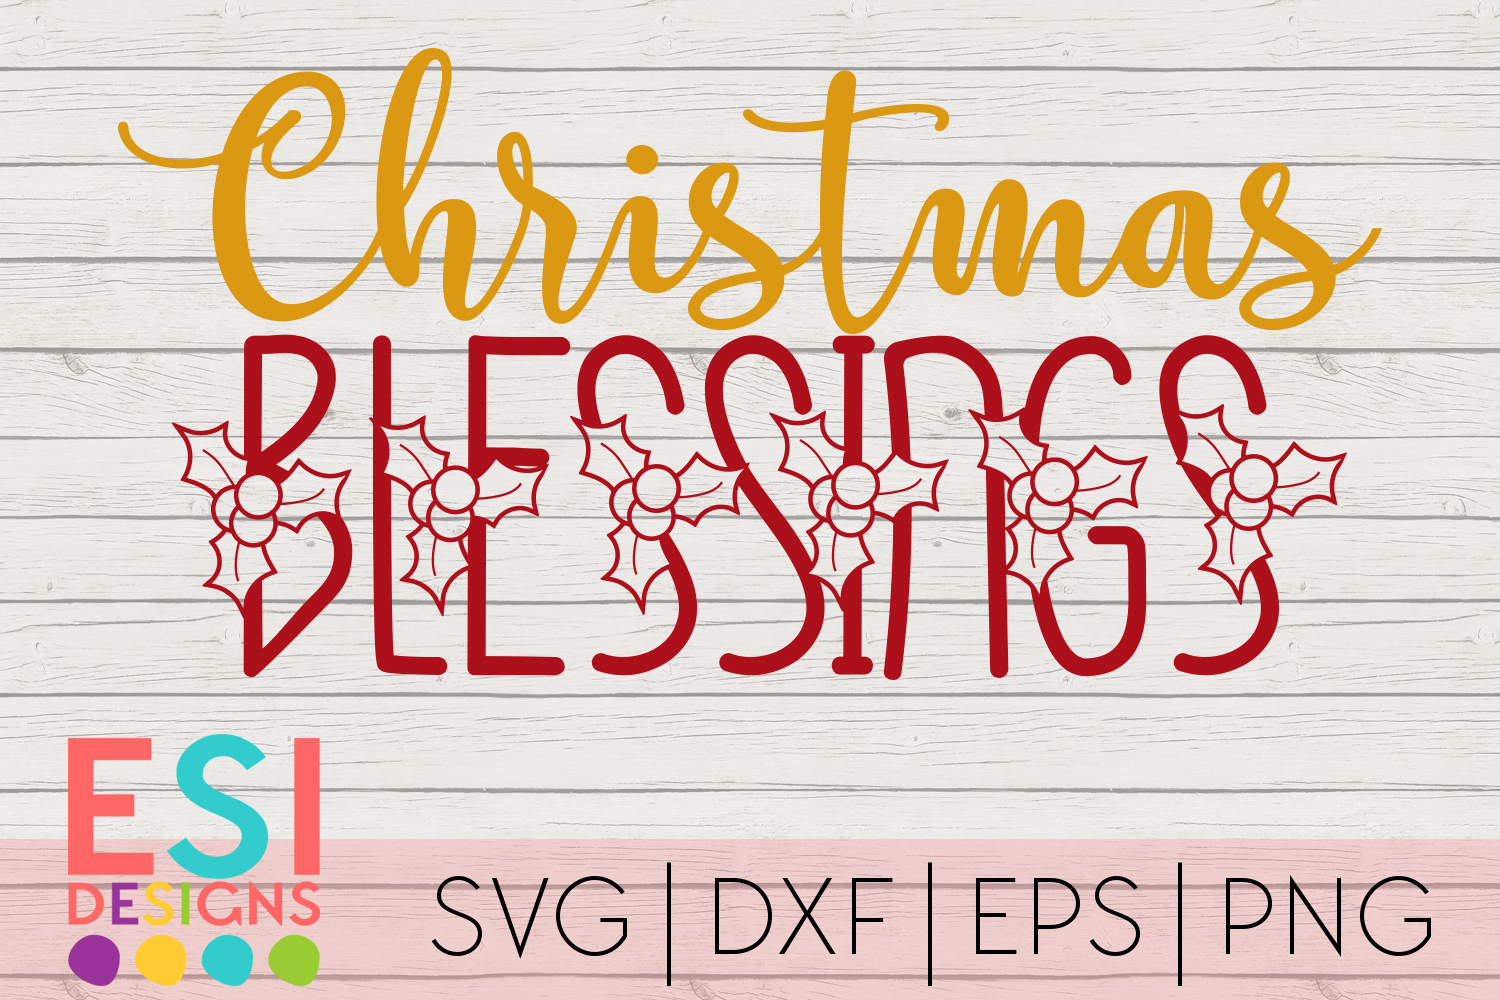 Download Christmas Blessings Quote Design|Christmas|SVG DXF EPS PNG